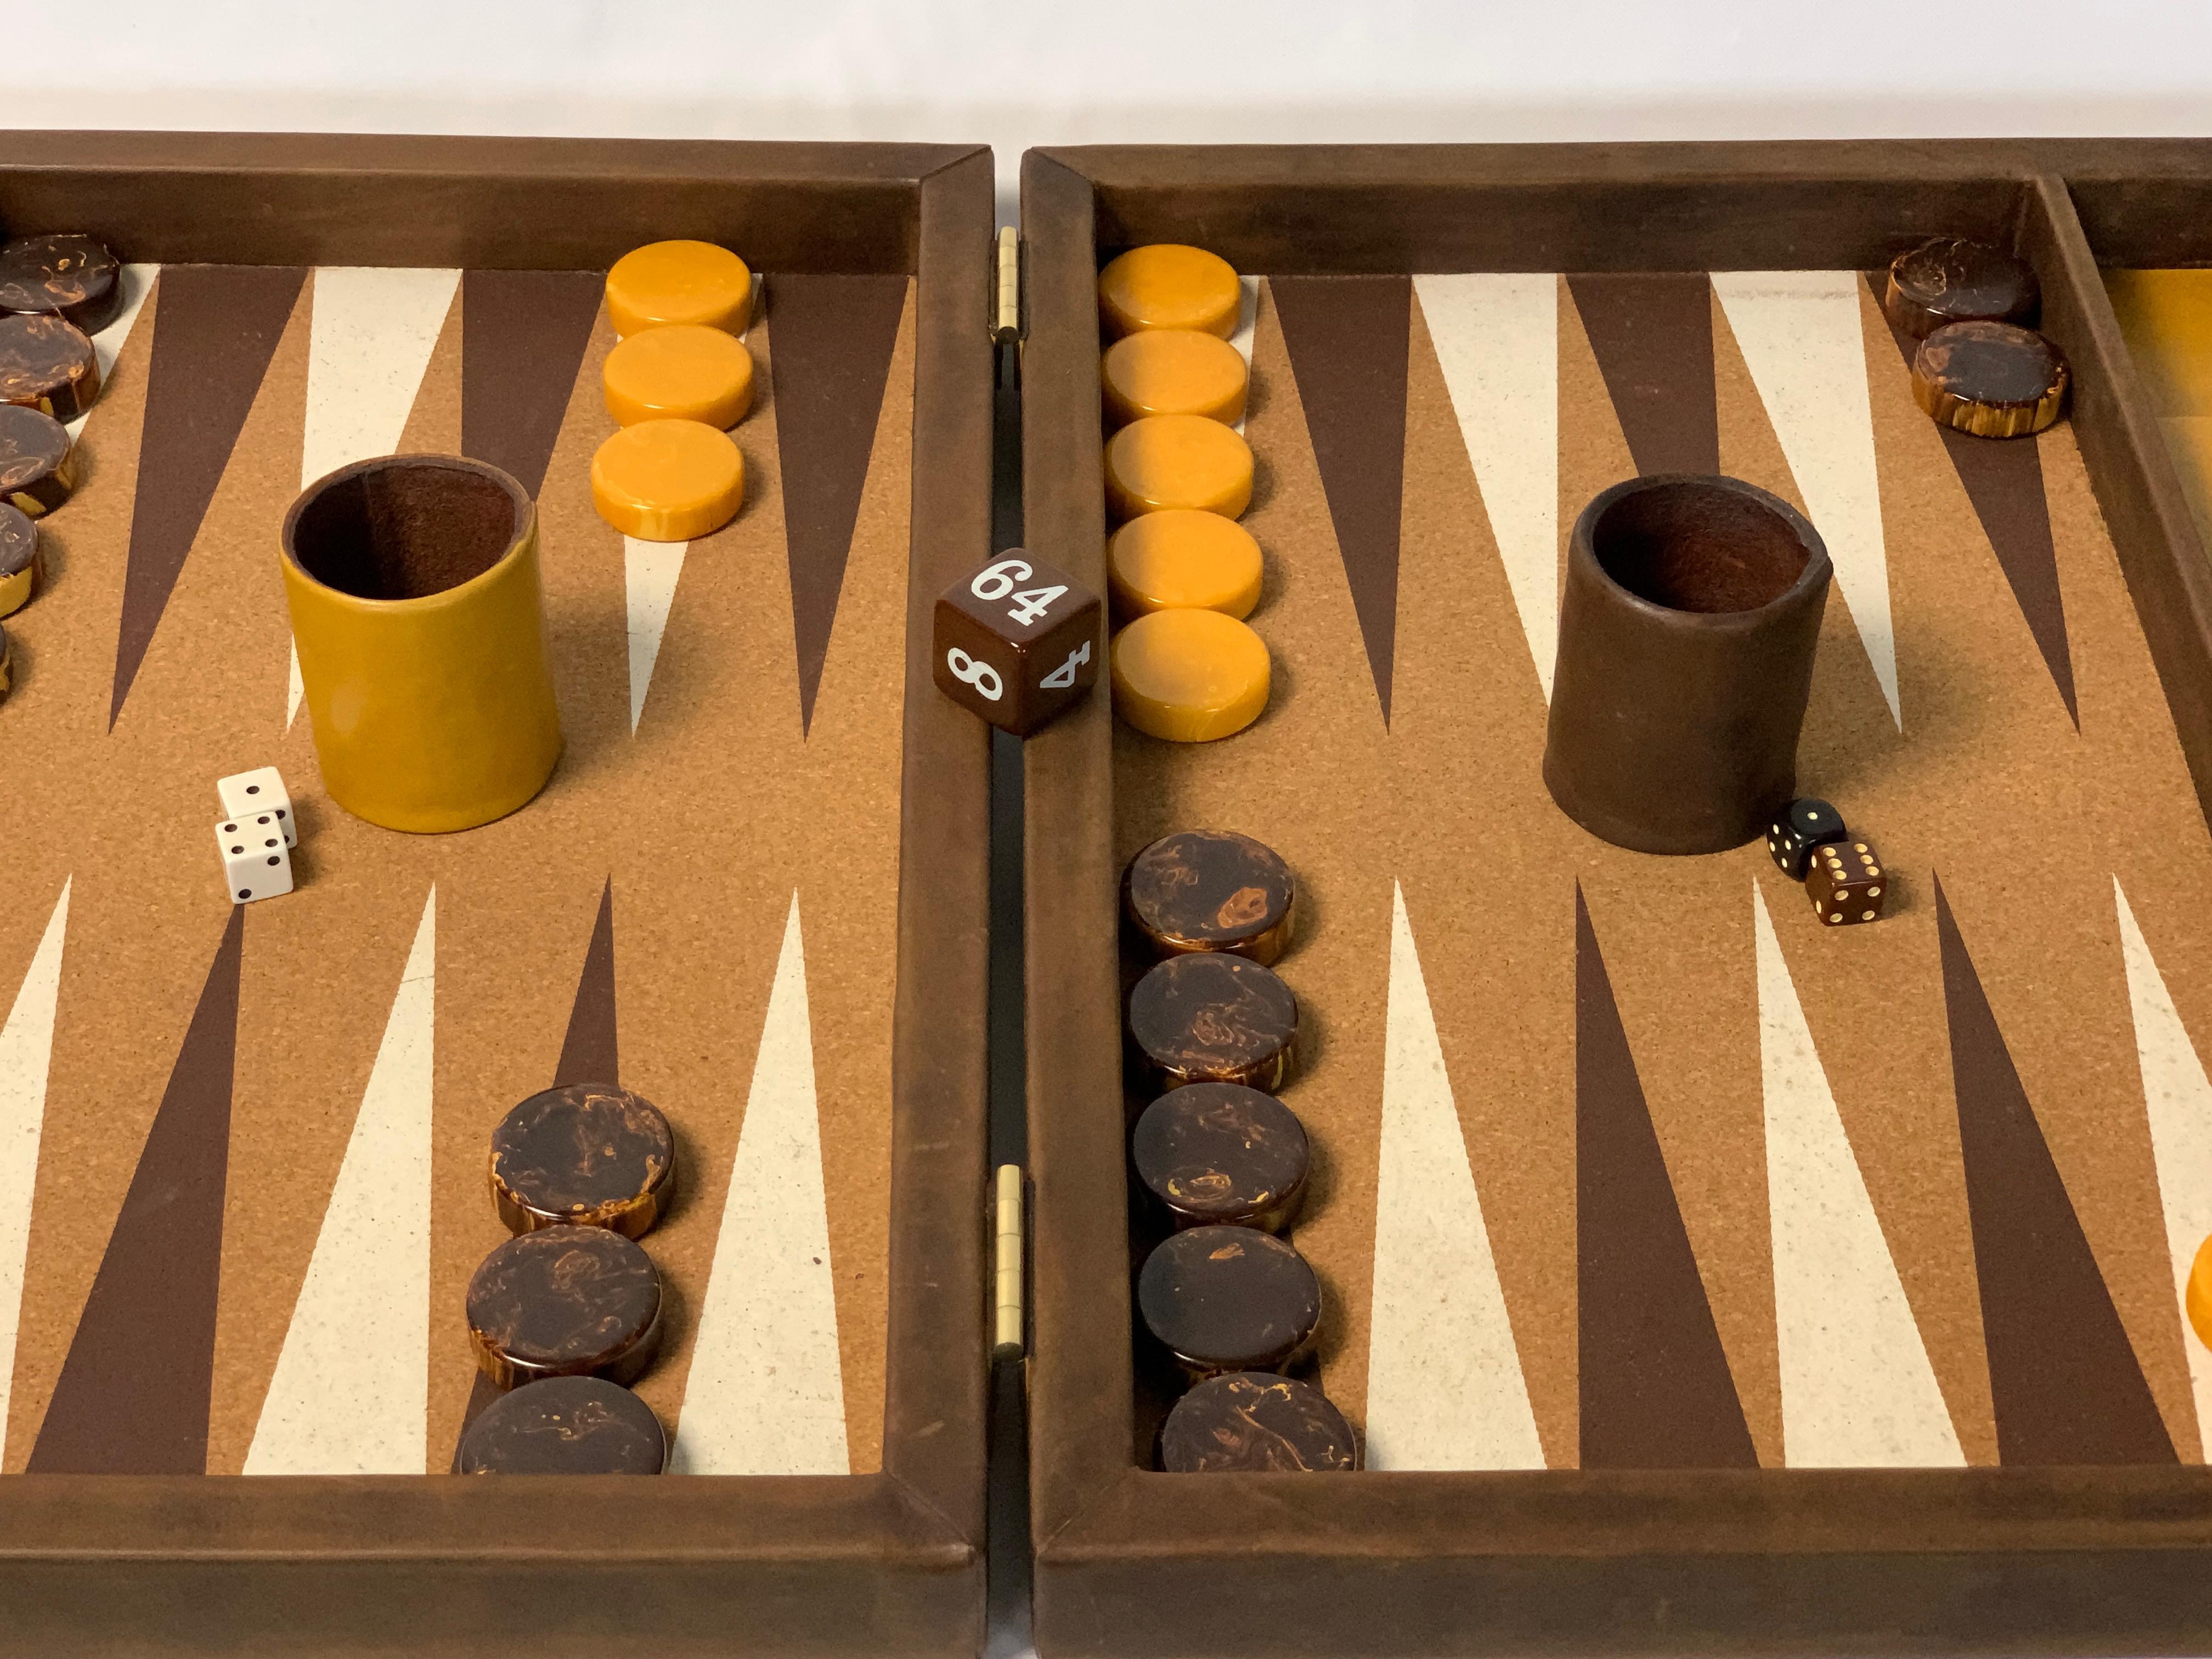 A large and impressive bespoke backgammon set done in chocolate brown and mustard yellow leather with cork playing surface and large bakelite playing pieces.